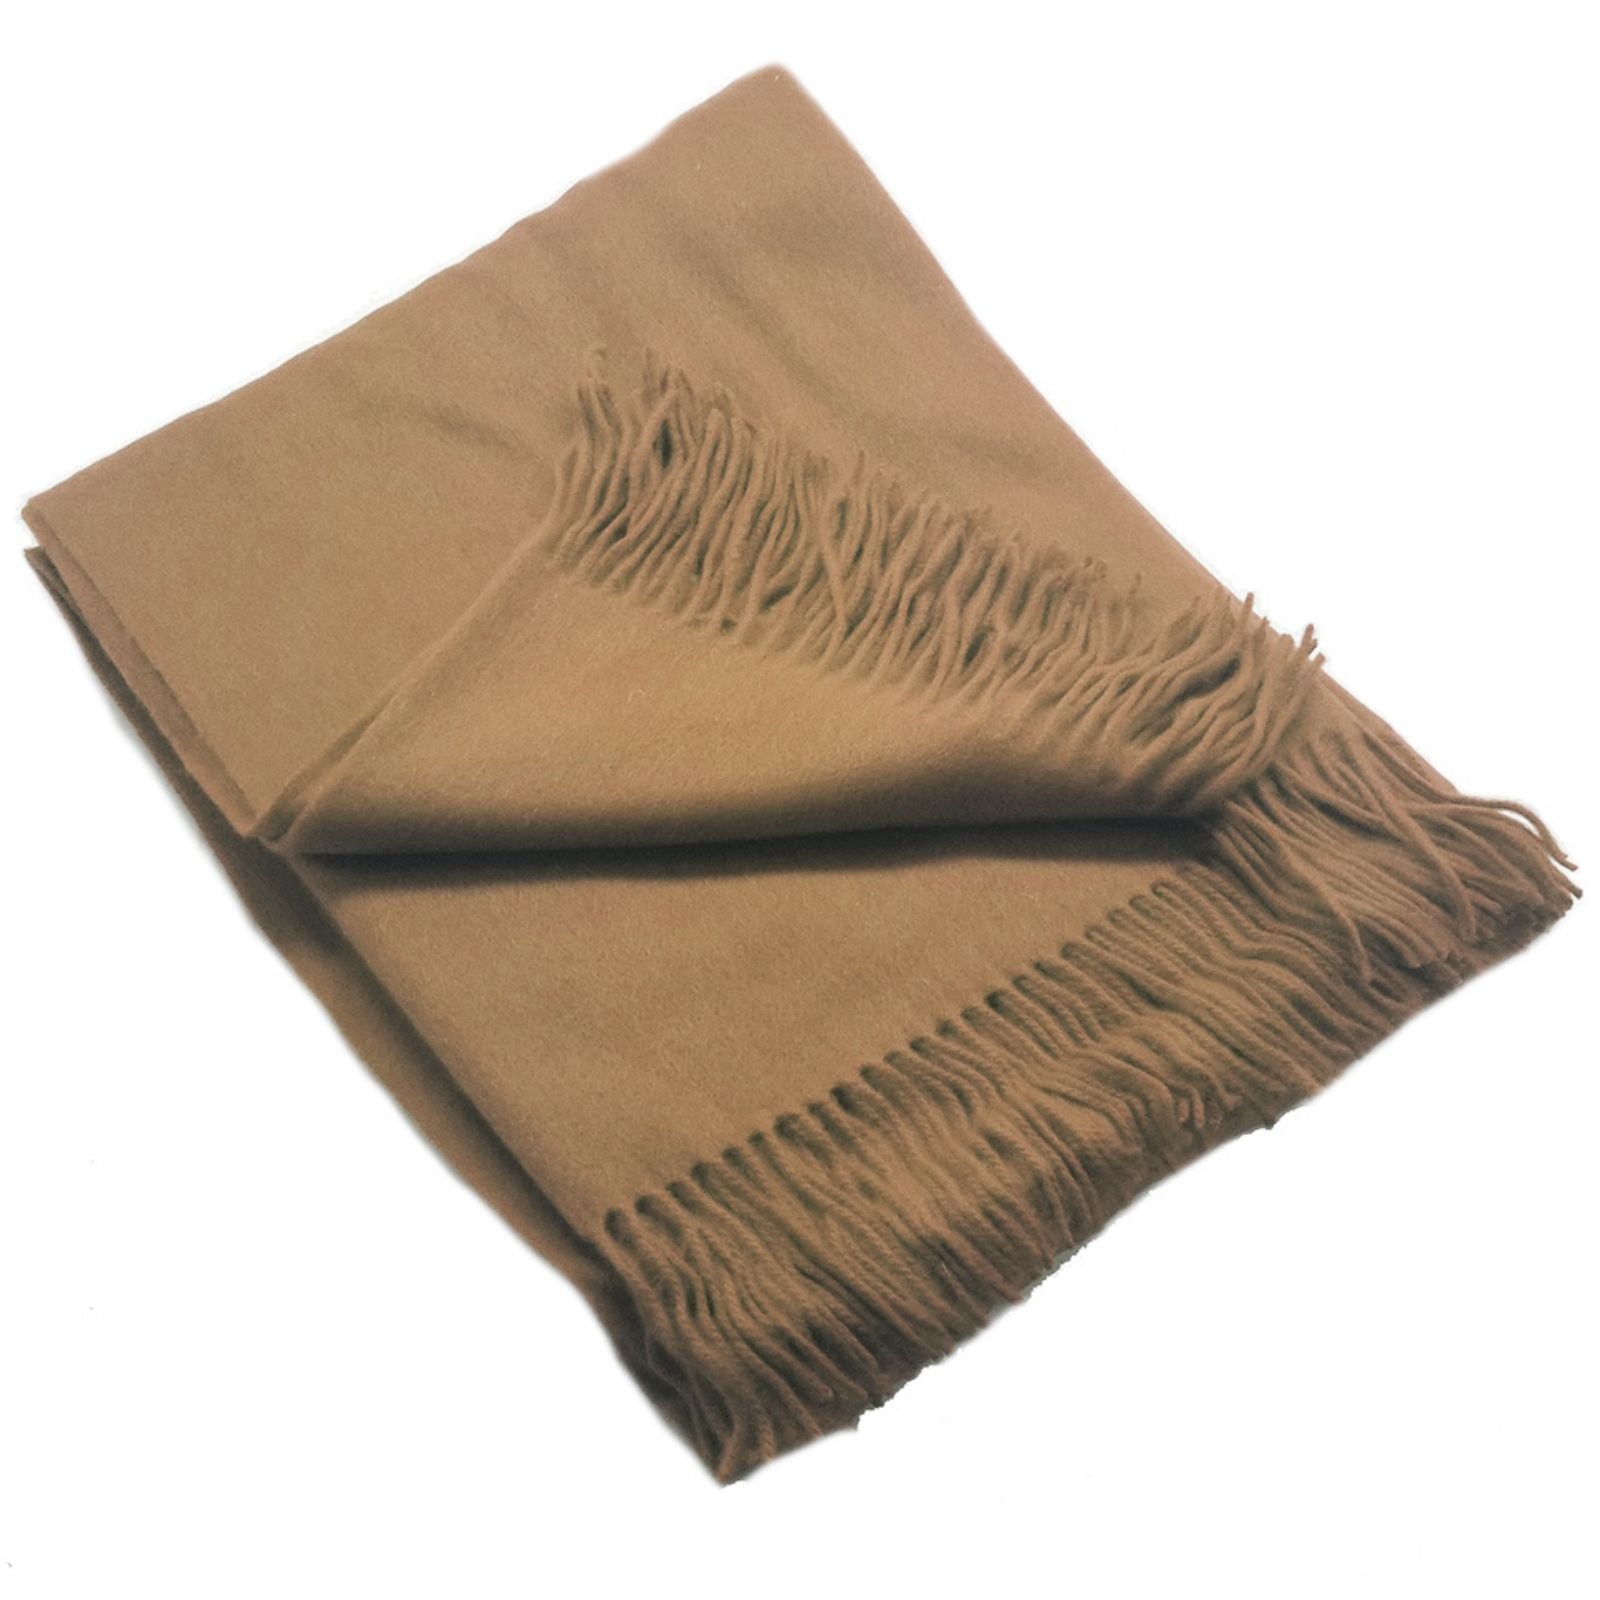 Cashmere Blanket Throw With Fringes